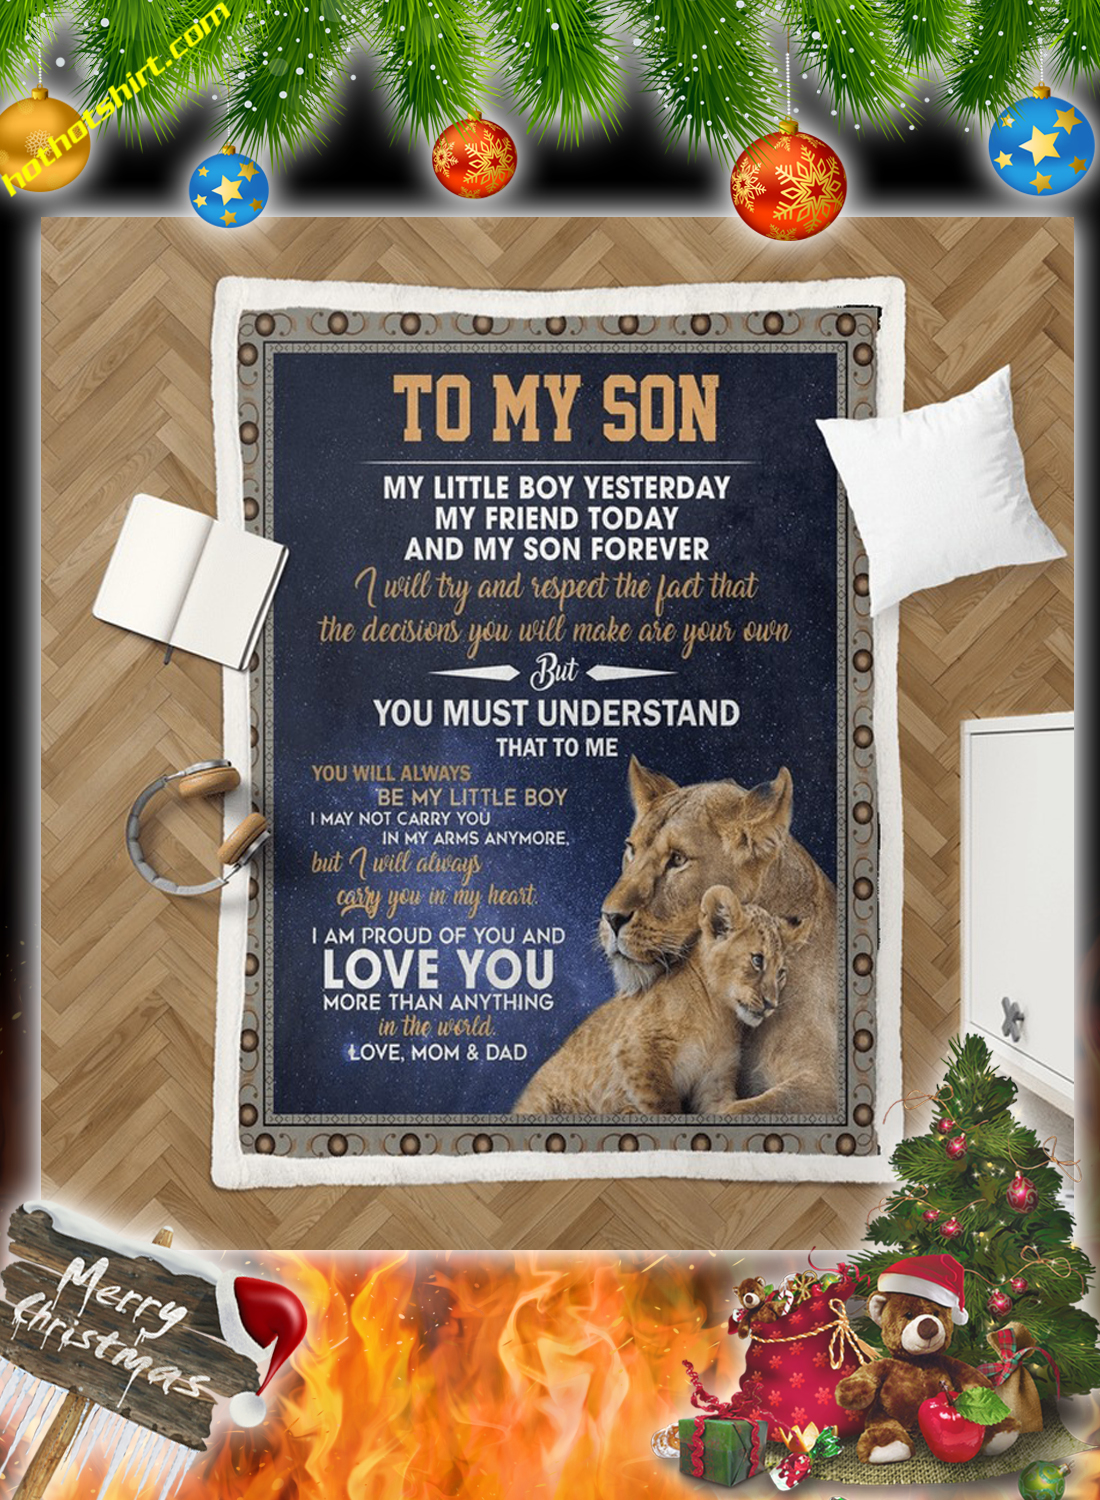 Lion To my son love mom and dad quilt 2